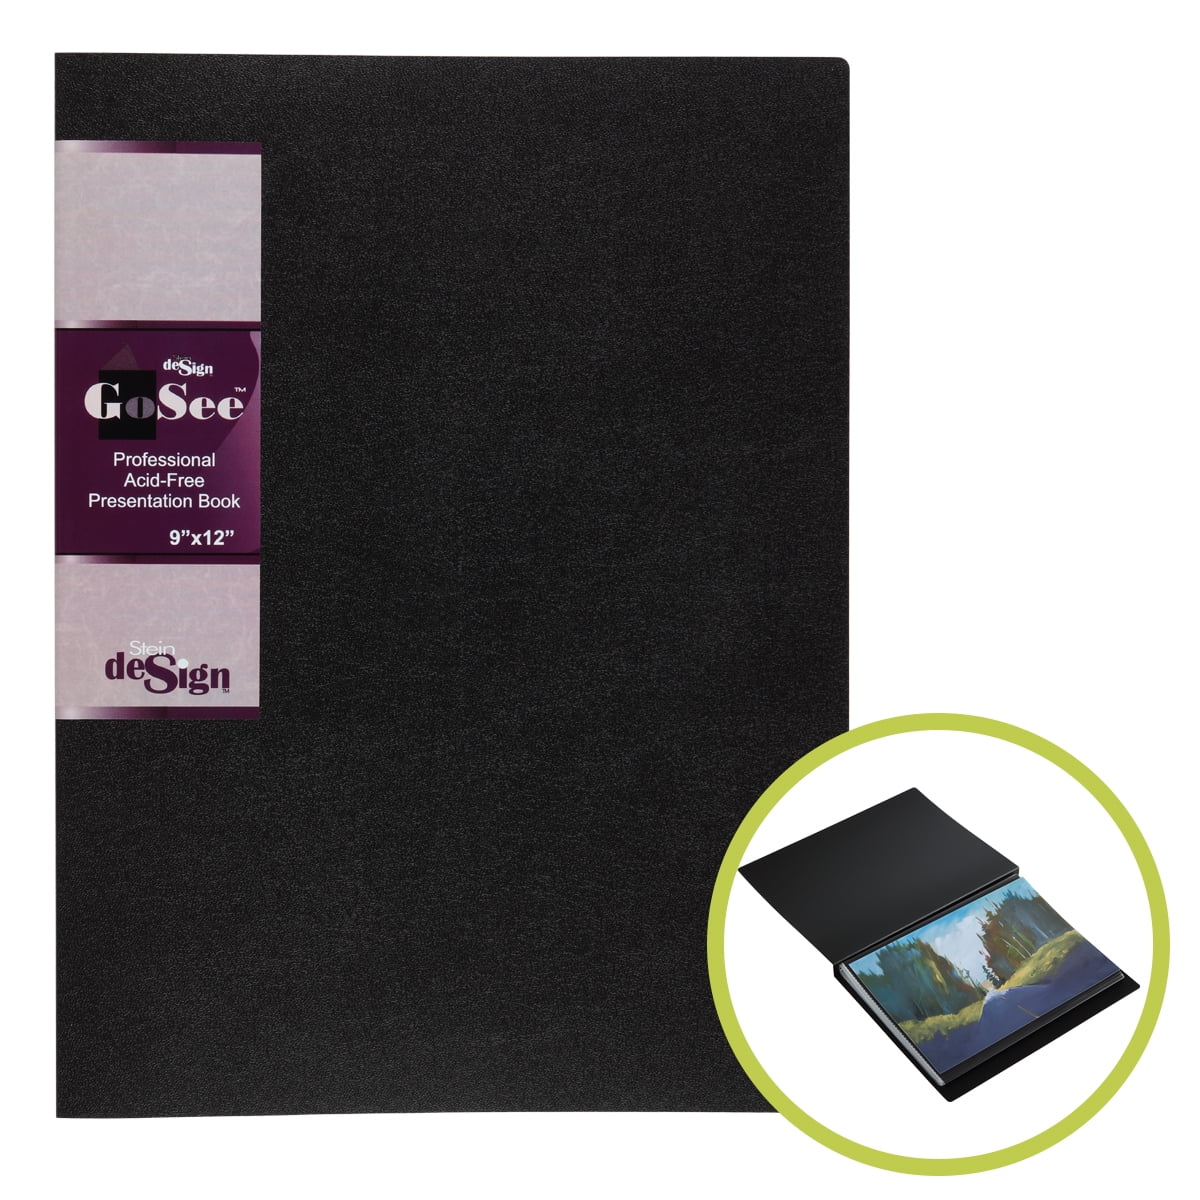 Cranbury Art Portfolio 9x12 Binder - (Black), 9 x 12 Binder with 24 Clear Sleeves, Displays 48 Pages, Customizable Cover, A4 Binder for Kids Art